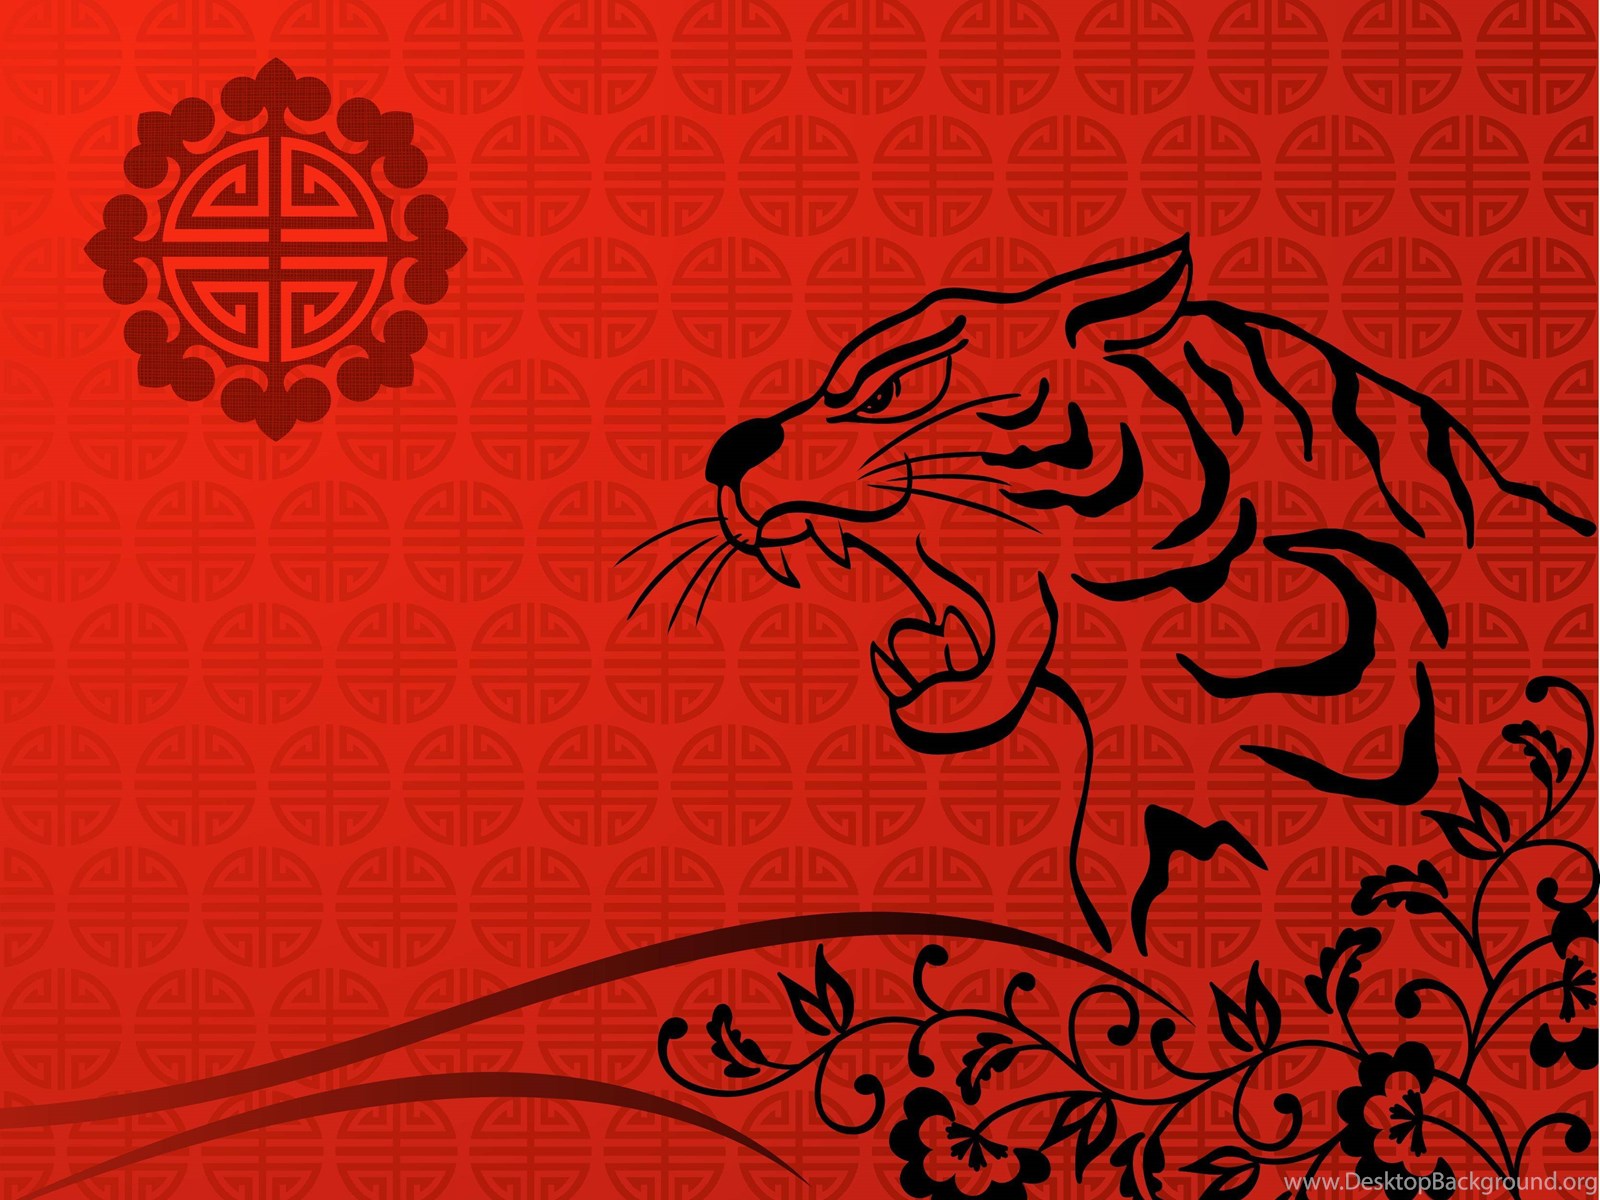 Chinese New Year Dragons Wallpaper HD Happy Republic Day Image Desktop Background